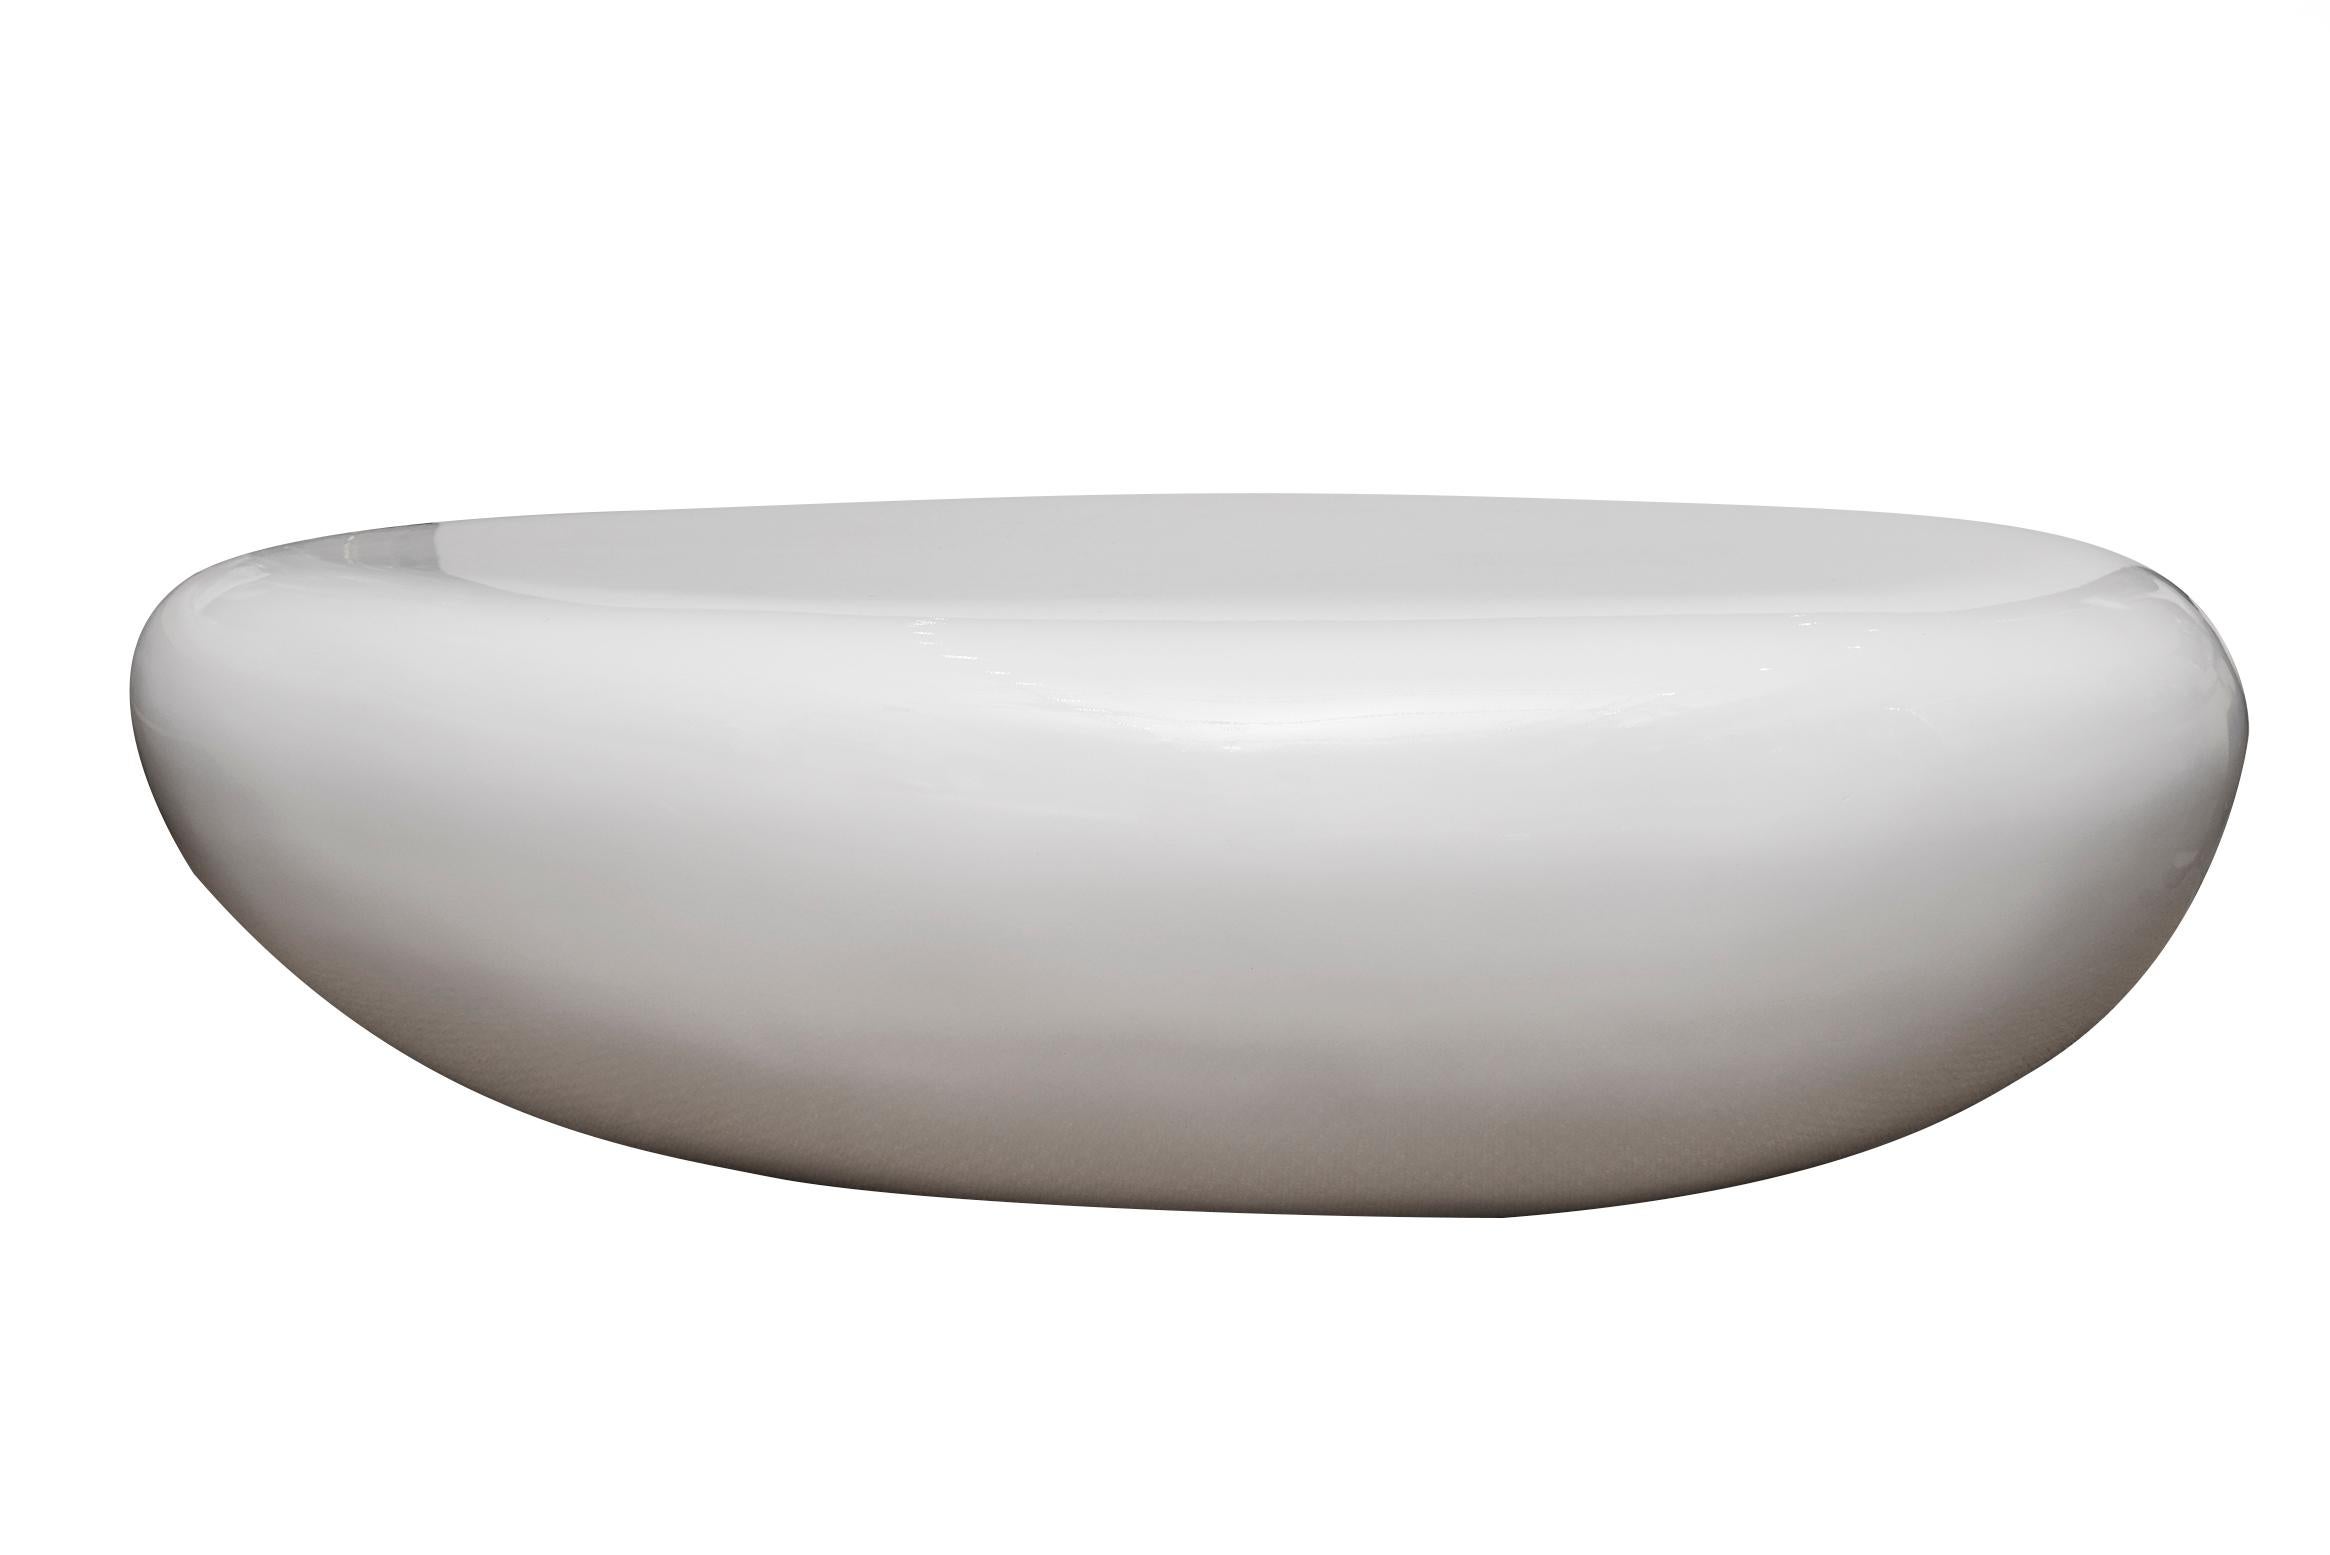 This wonderful sculptural resin cocktail table is in the shape of an egg or bean. From the 80's. It was just repainted with white lacquer automobile paint but it has bubbles on top because it did not dry properly. The restorer who did this is now